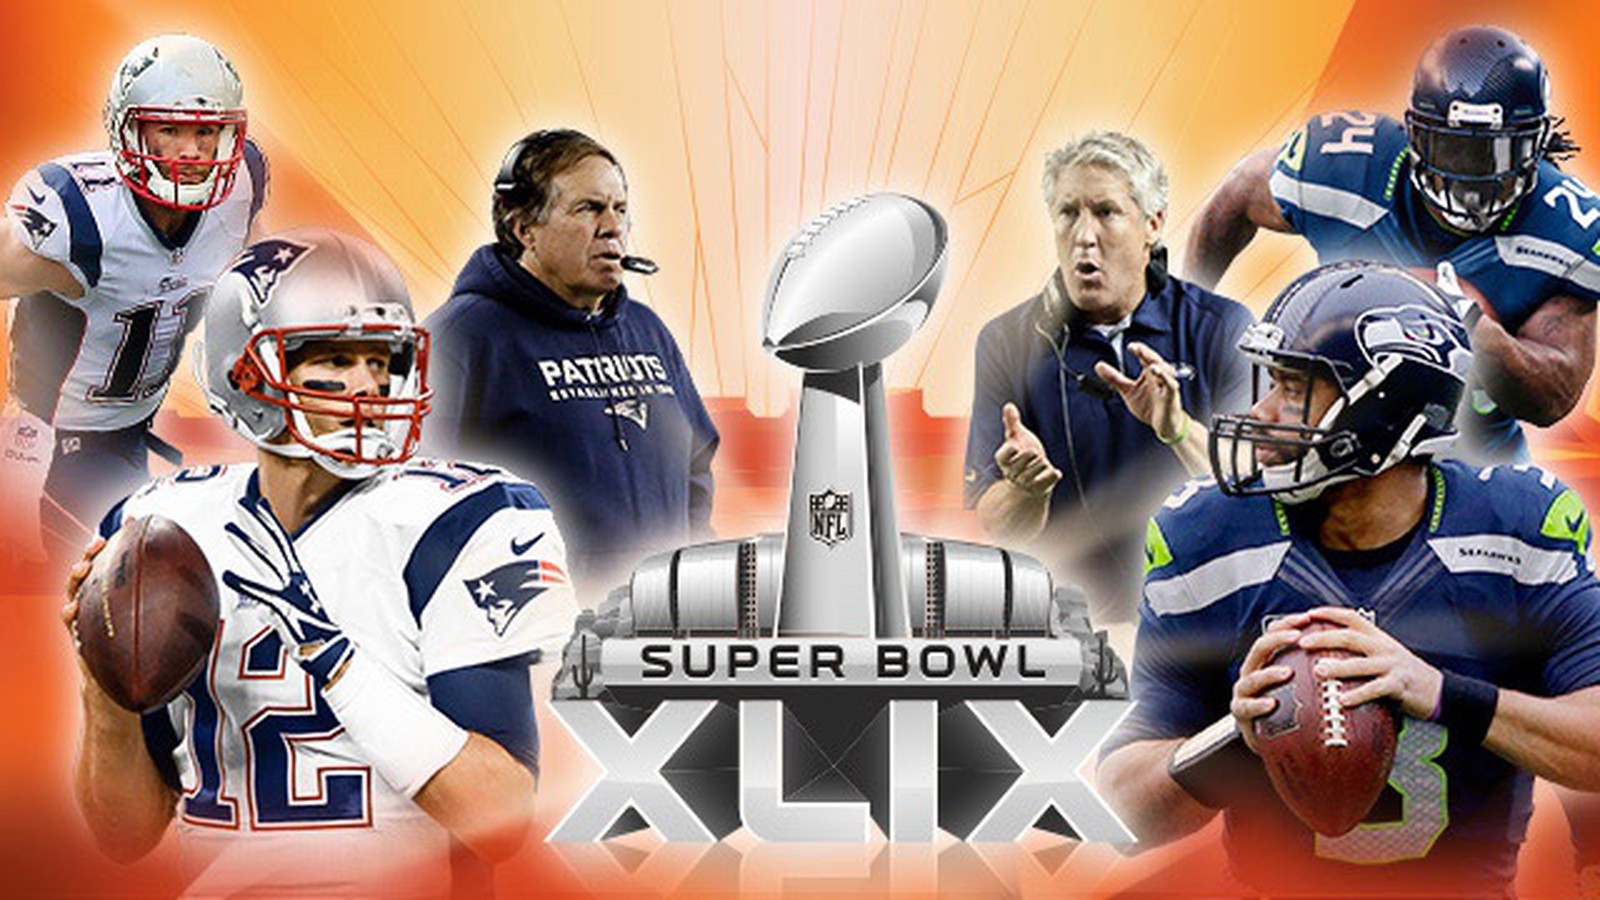 How To Stream The Super Bowl Without Cable NBC to Stream Super Bowl XLIX on iPad and Mac for Free, No Cable